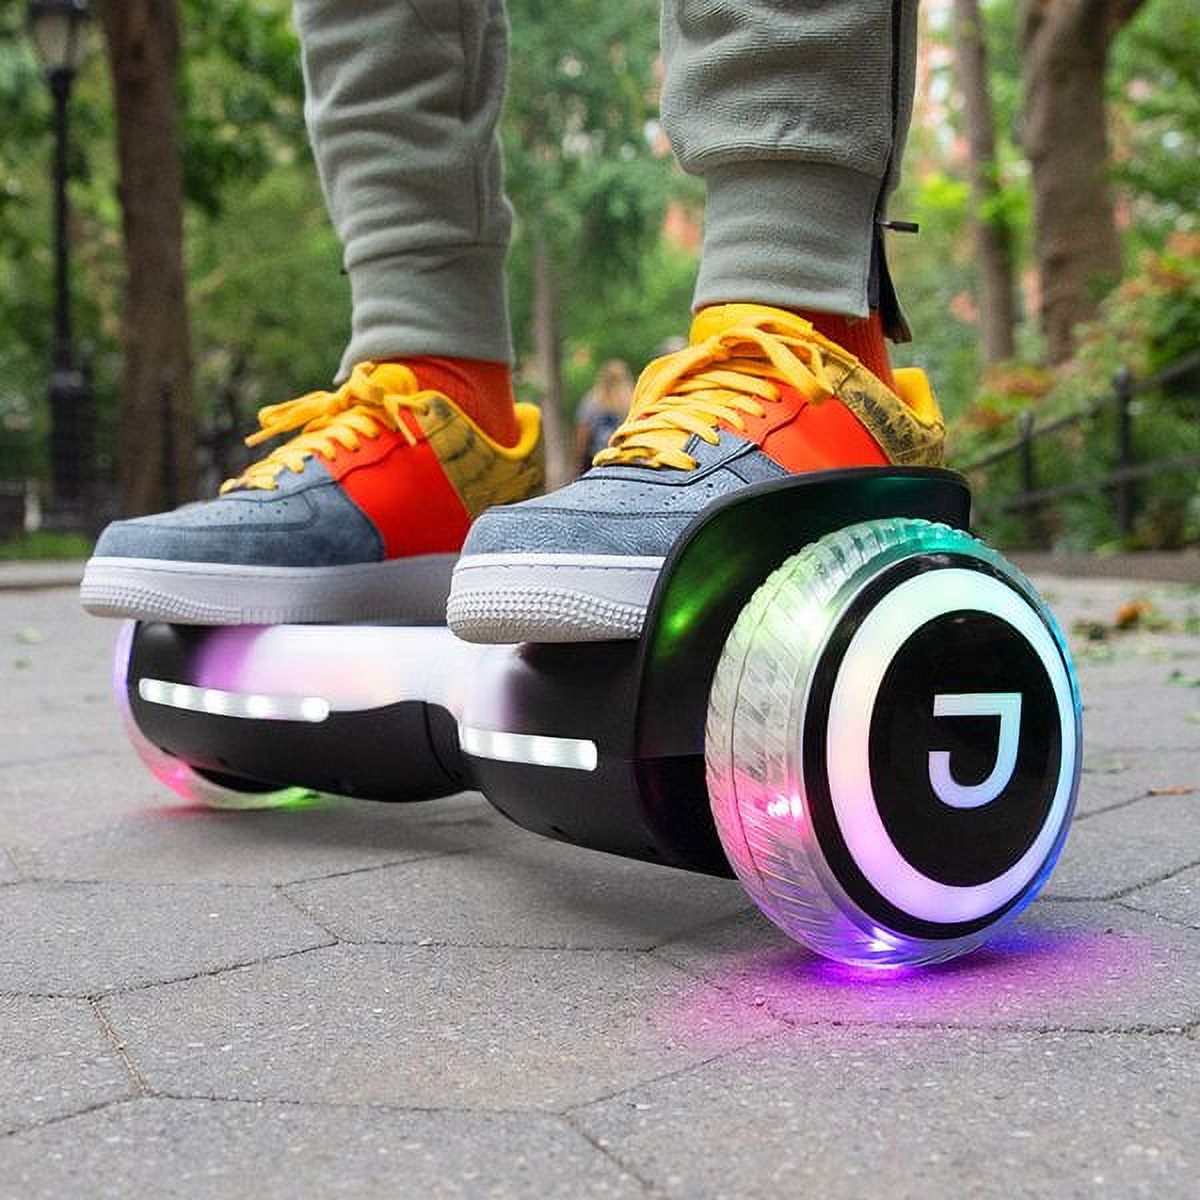 Jetson Hali X Luminous Extreme Terrain Dynamic Bluetooth Speakers Hoverboard, Black - image 5 of 11